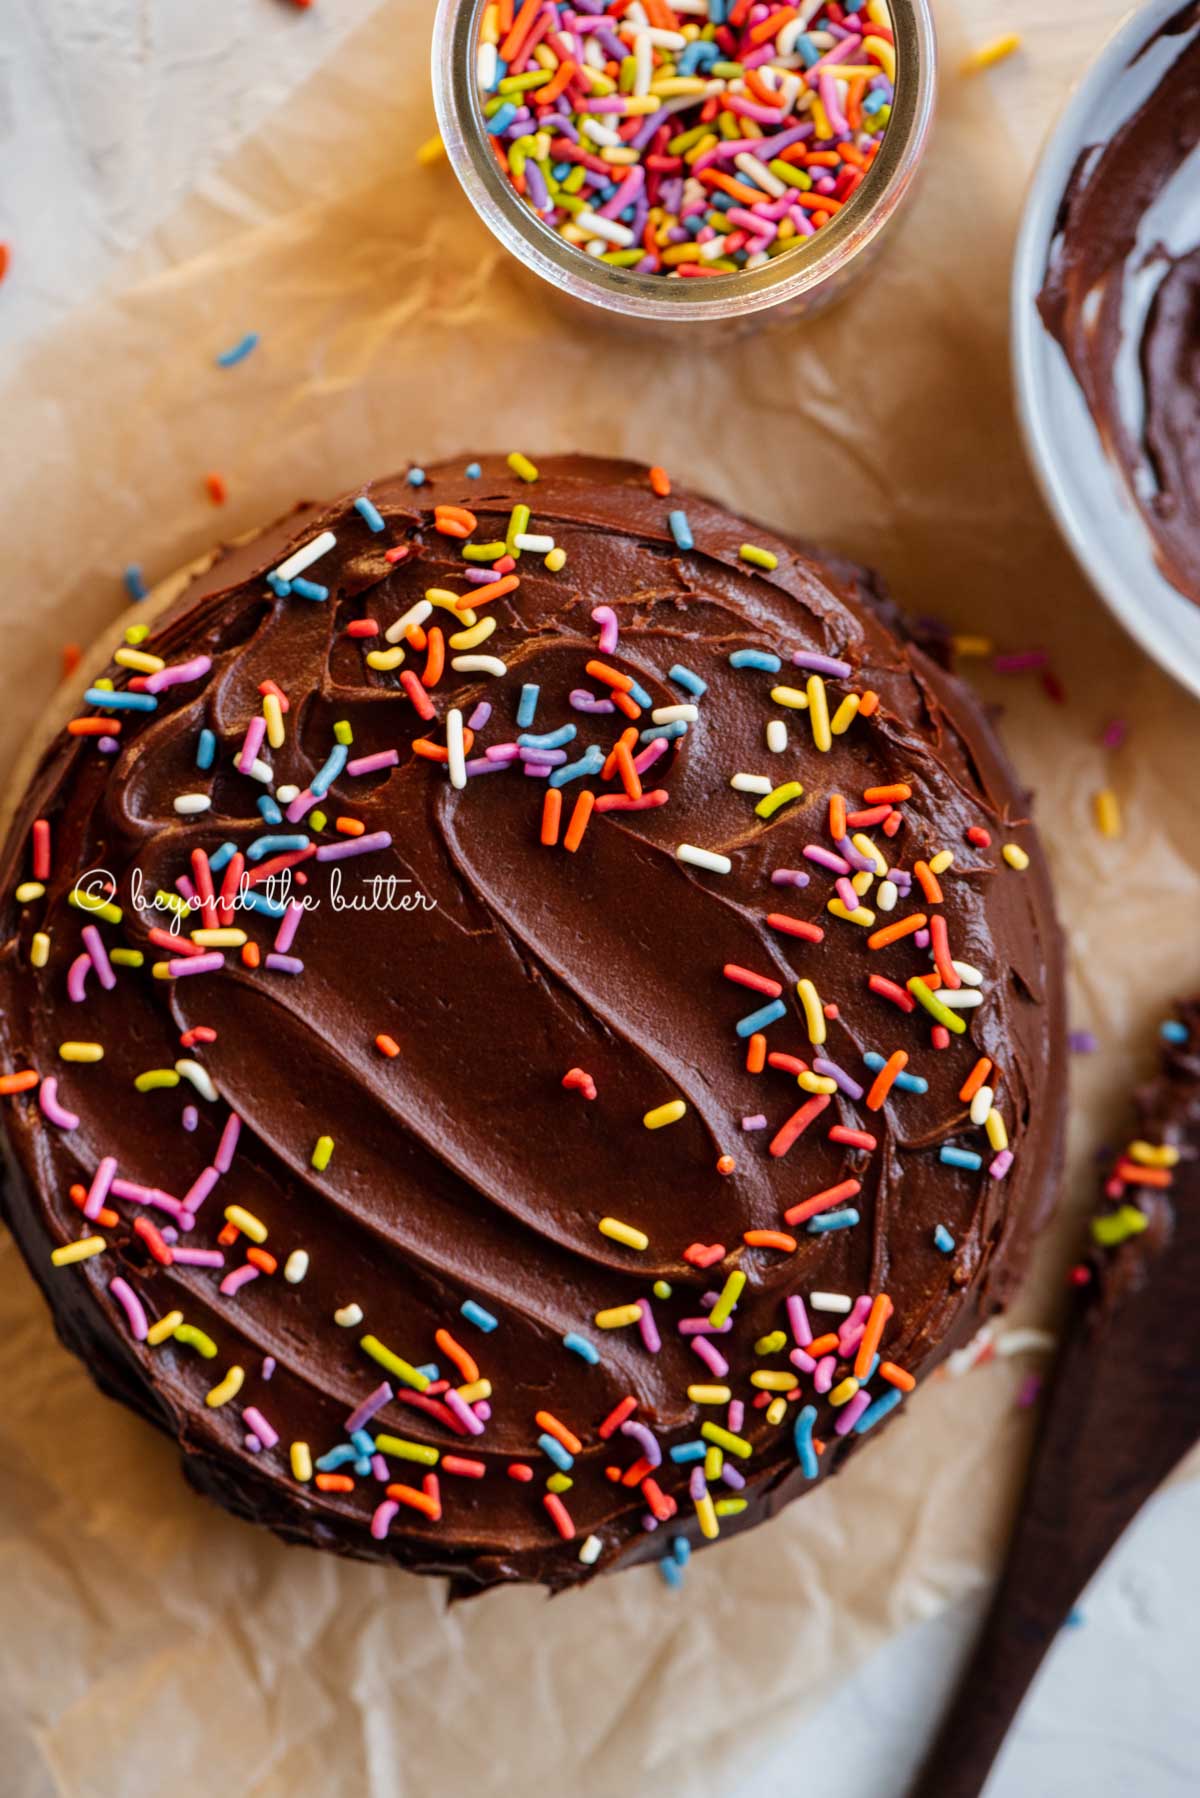 Overhead image of single layer chocolate cake with bowl of milk chocolate frosting | All Images © Beyond the Butter®